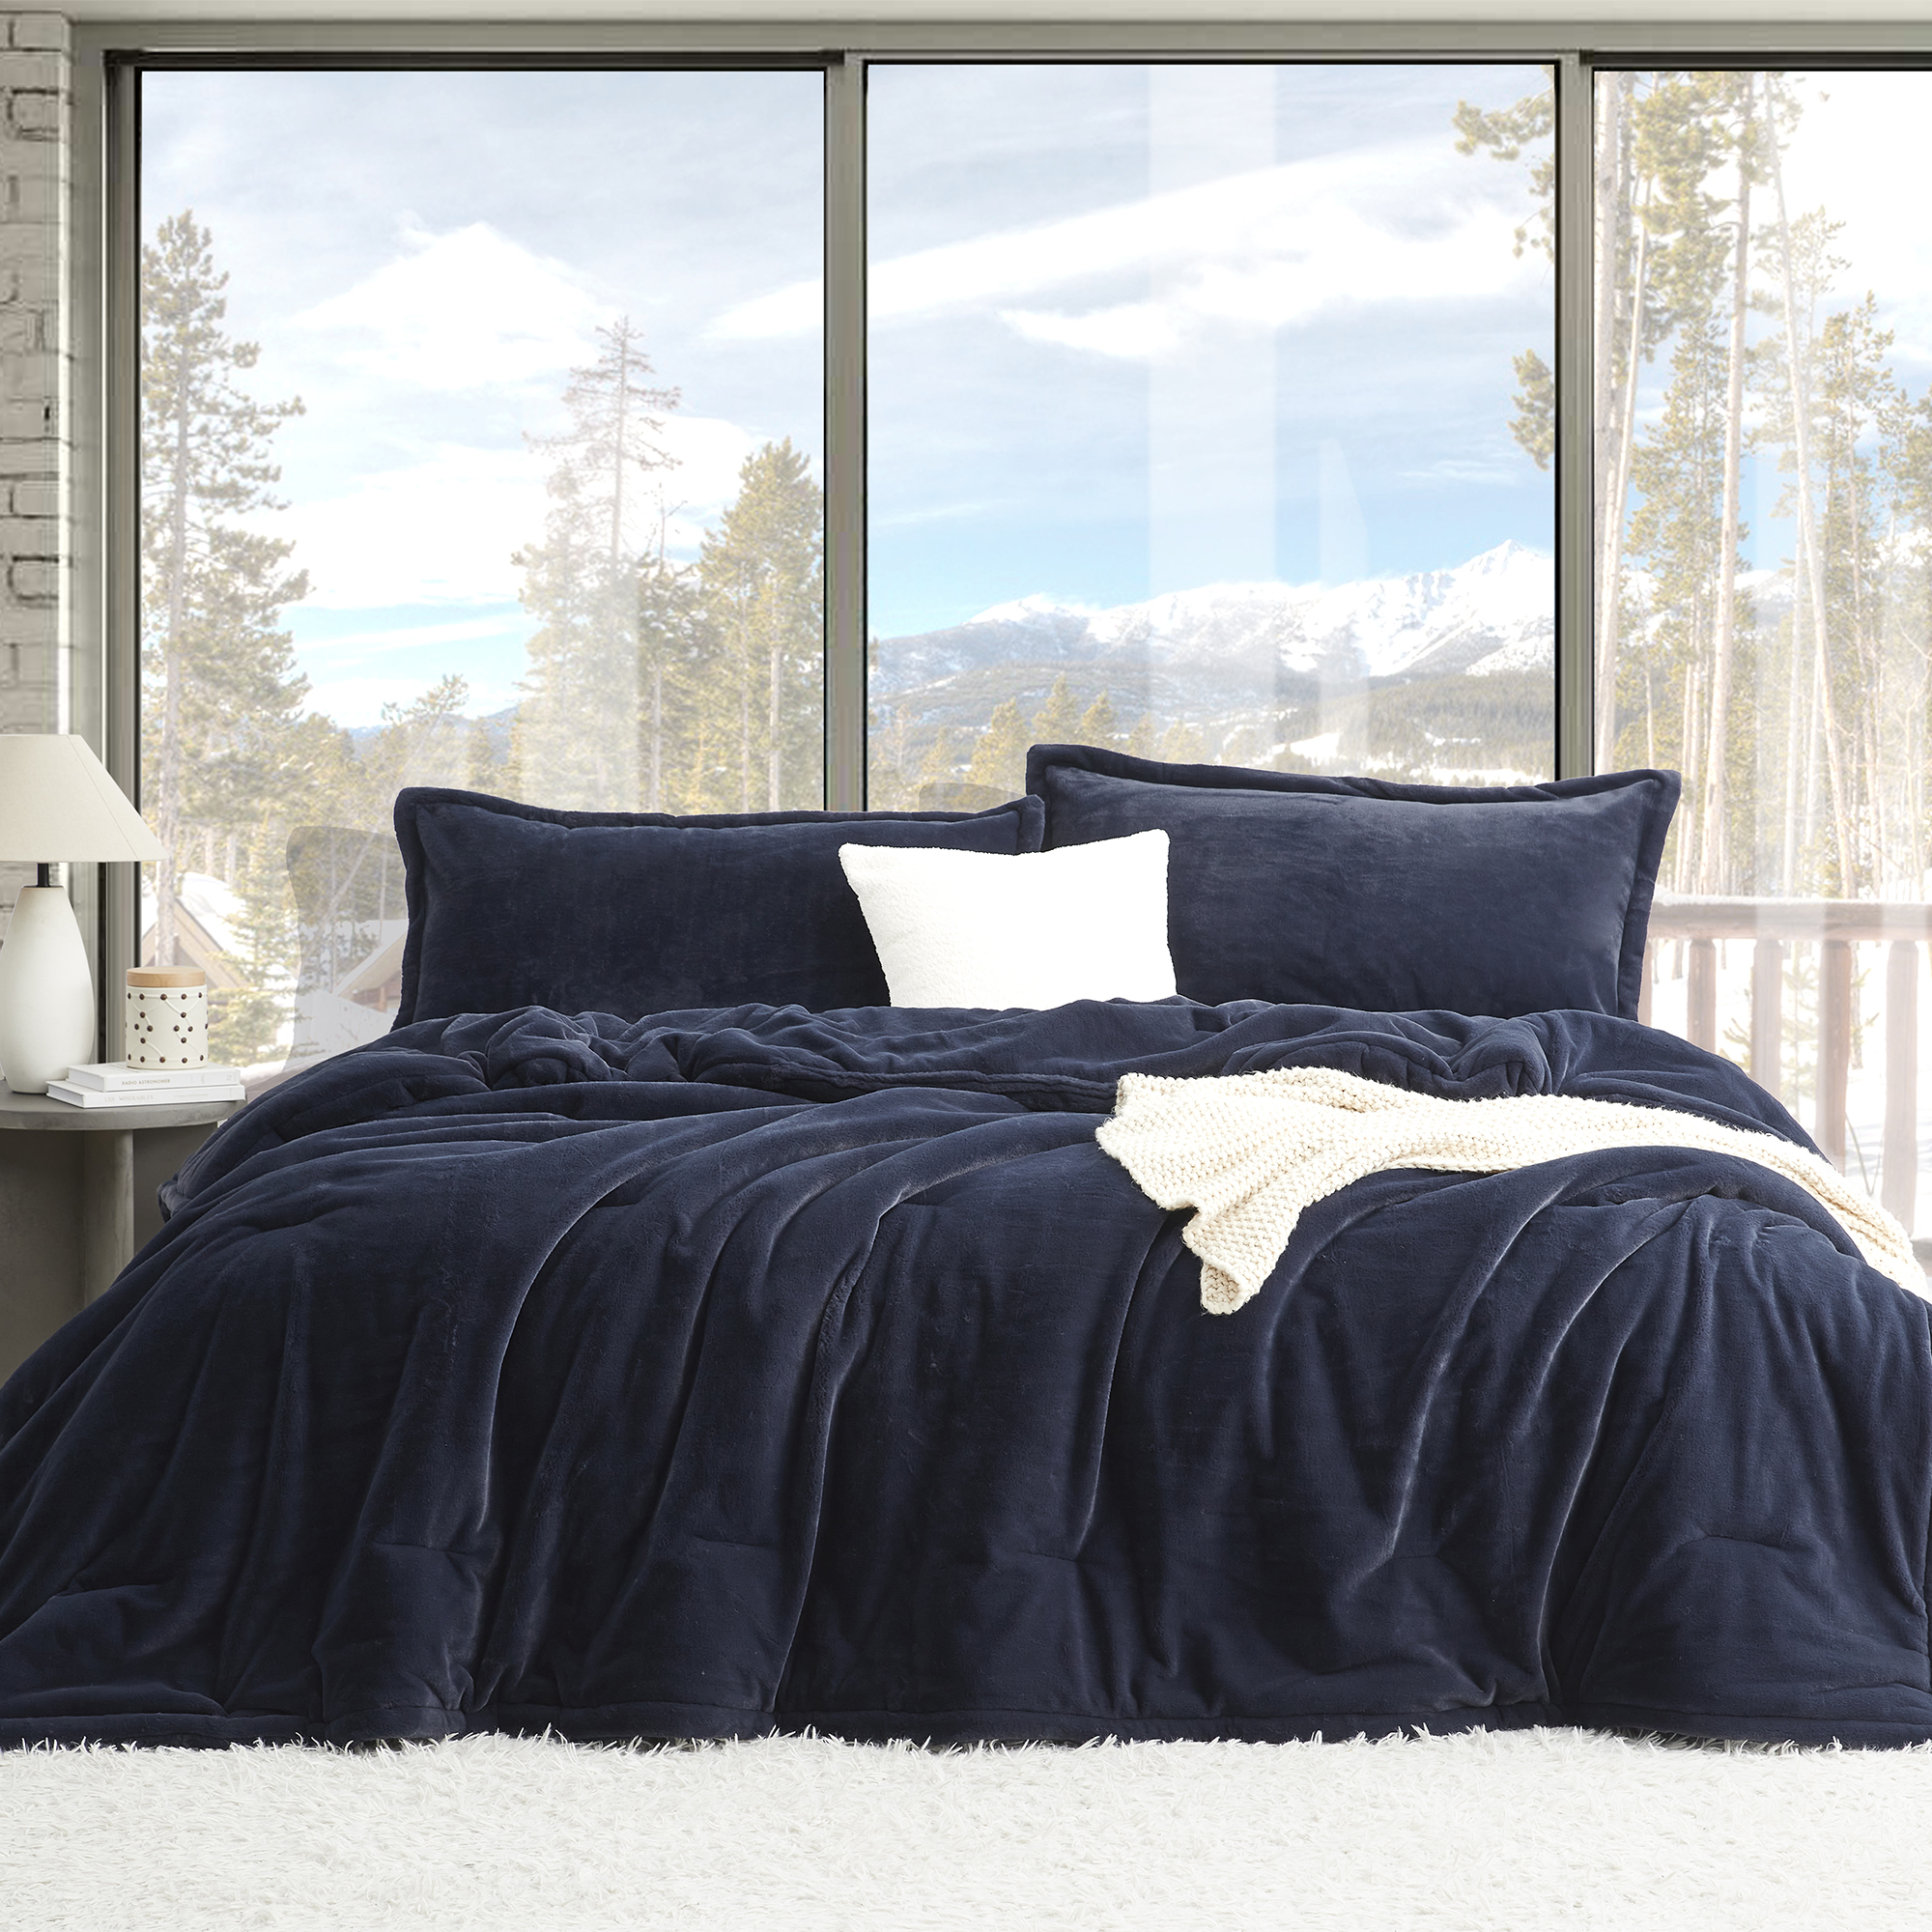 Softer than Soft - Coma Inducer® Oversized King Comforter - Blue Nights